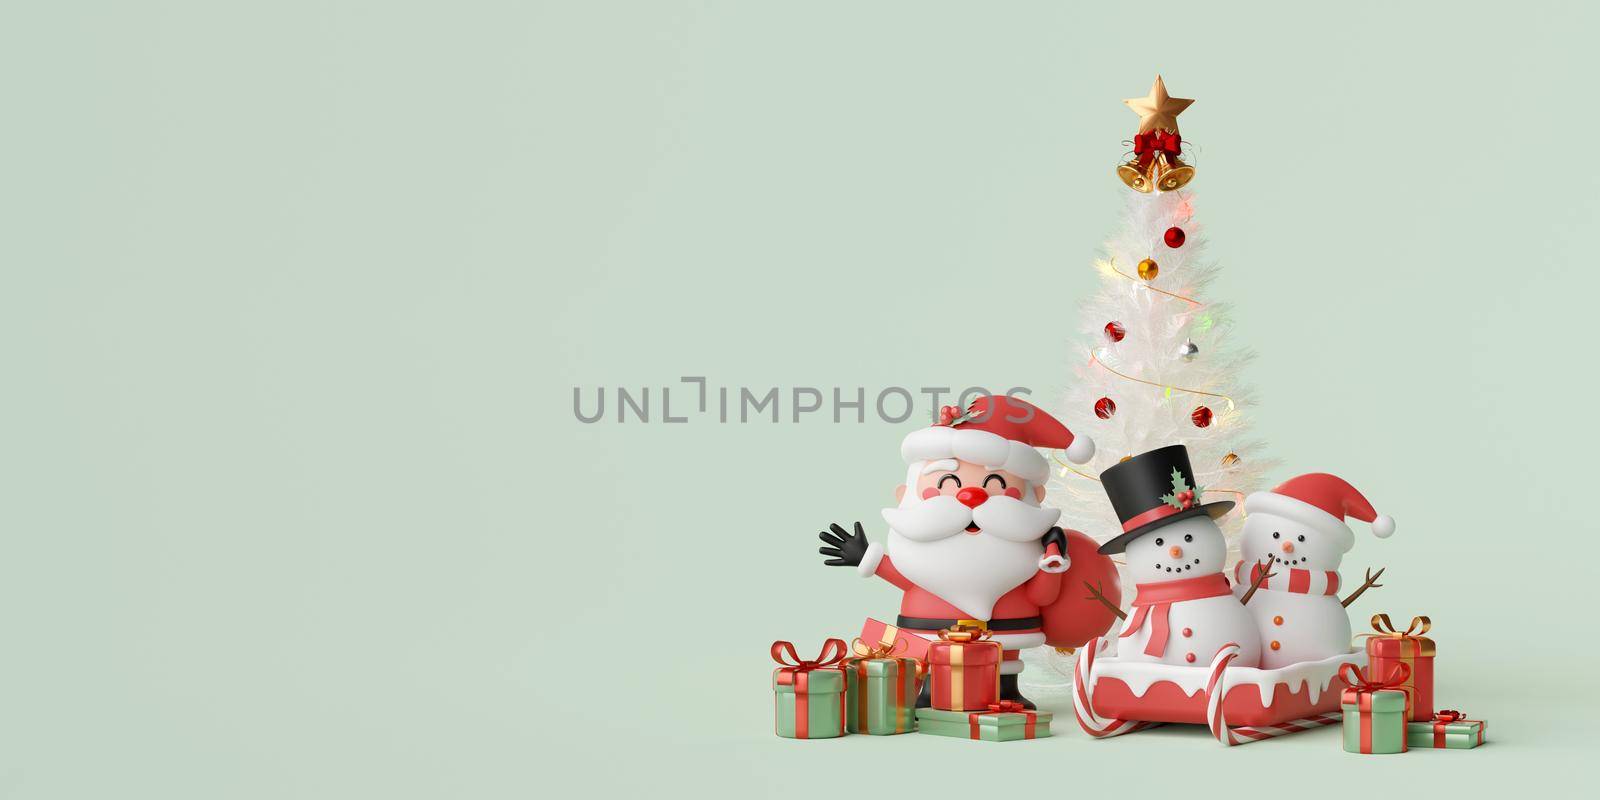 Christmas theme banner of Santa Claus and snowman with Christmas tree and gift box, 3d illustration by nutzchotwarut